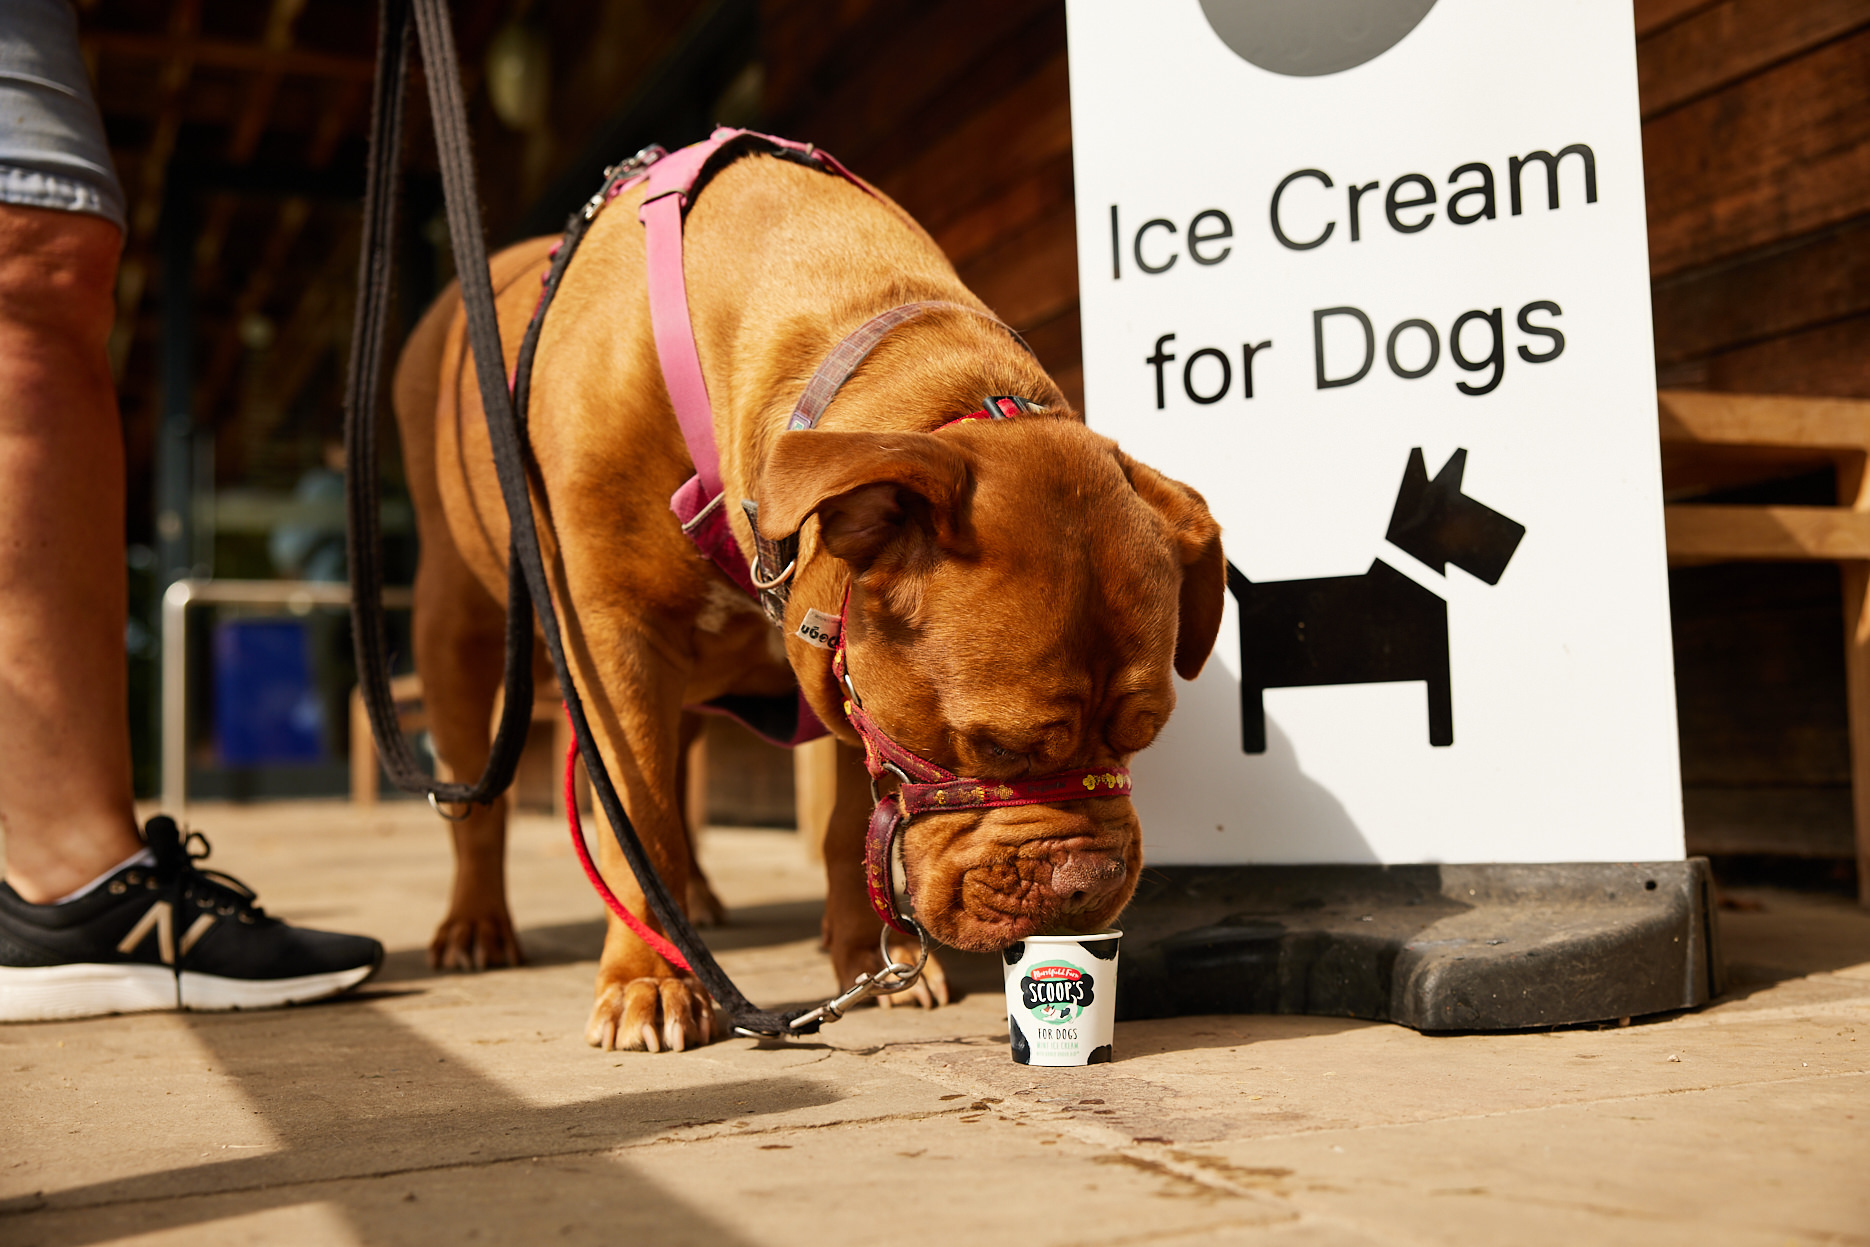 A large tan coloured dog eating a dog ice cream in front of a white sign reading Ice Cream for Dogs